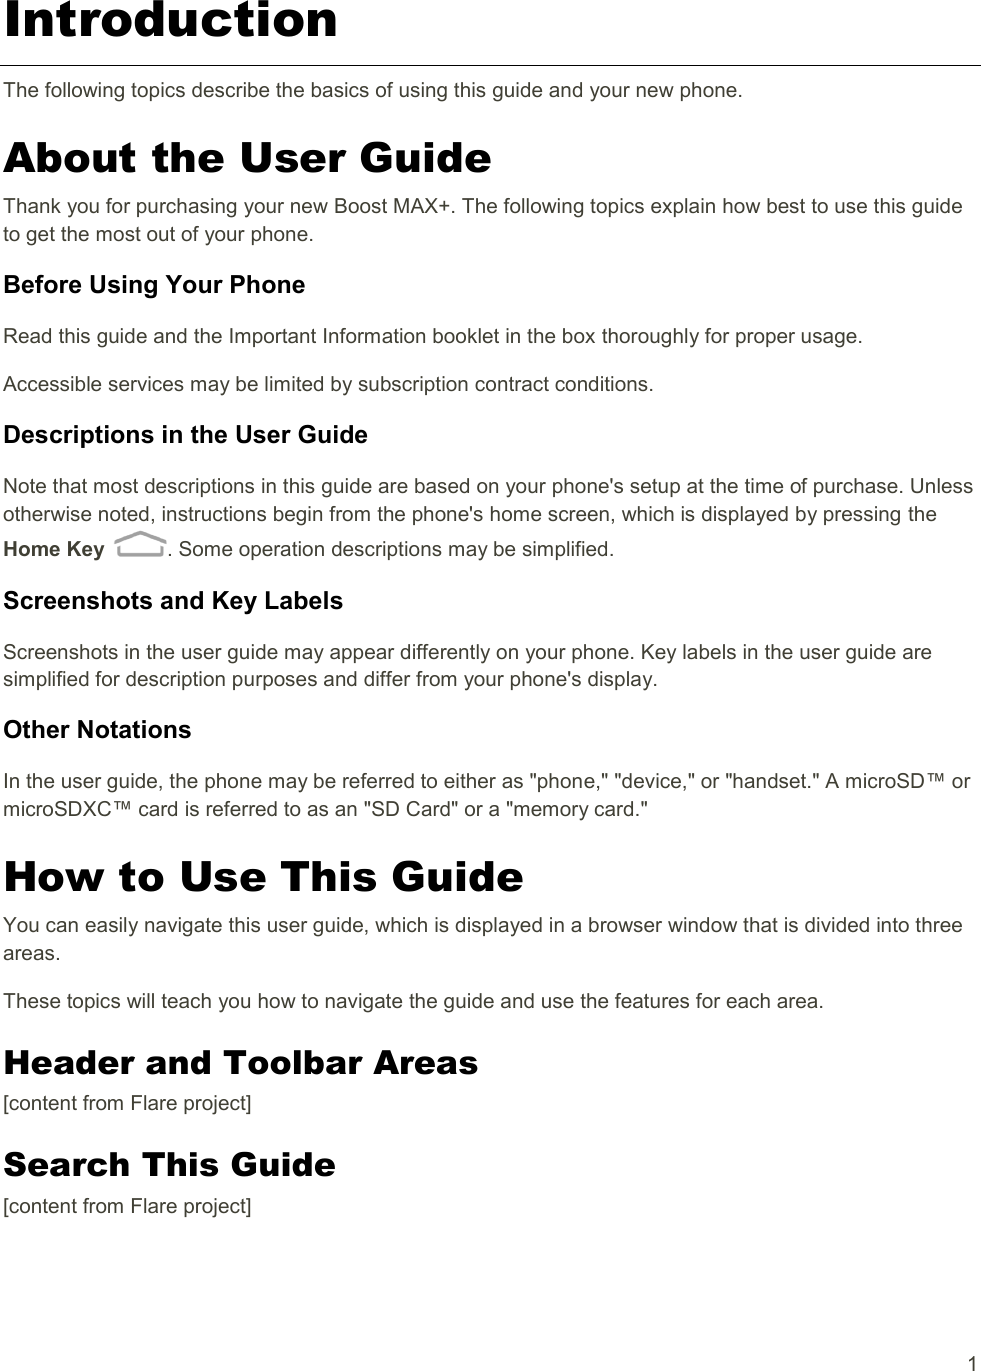   1 Introduction The following topics describe the basics of using this guide and your new phone. About the User Guide Thank you for purchasing your new Boost MAX+. The following topics explain how best to use this guide to get the most out of your phone. Before Using Your Phone Read this guide and the Important Information booklet in the box thoroughly for proper usage. Accessible services may be limited by subscription contract conditions. Descriptions in the User Guide Note that most descriptions in this guide are based on your phone&apos;s setup at the time of purchase. Unless otherwise noted, instructions begin from the phone&apos;s home screen, which is displayed by pressing the Home Key  . Some operation descriptions may be simplified. Screenshots and Key Labels Screenshots in the user guide may appear differently on your phone. Key labels in the user guide are simplified for description purposes and differ from your phone&apos;s display. Other Notations In the user guide, the phone may be referred to either as &quot;phone,&quot; &quot;device,&quot; or &quot;handset.&quot; A microSD™ or microSDXC™ card is referred to as an &quot;SD Card&quot; or a &quot;memory card.&quot; How to Use This Guide You can easily navigate this user guide, which is displayed in a browser window that is divided into three areas. These topics will teach you how to navigate the guide and use the features for each area. Header and Toolbar Areas [content from Flare project] Search This Guide [content from Flare project] 